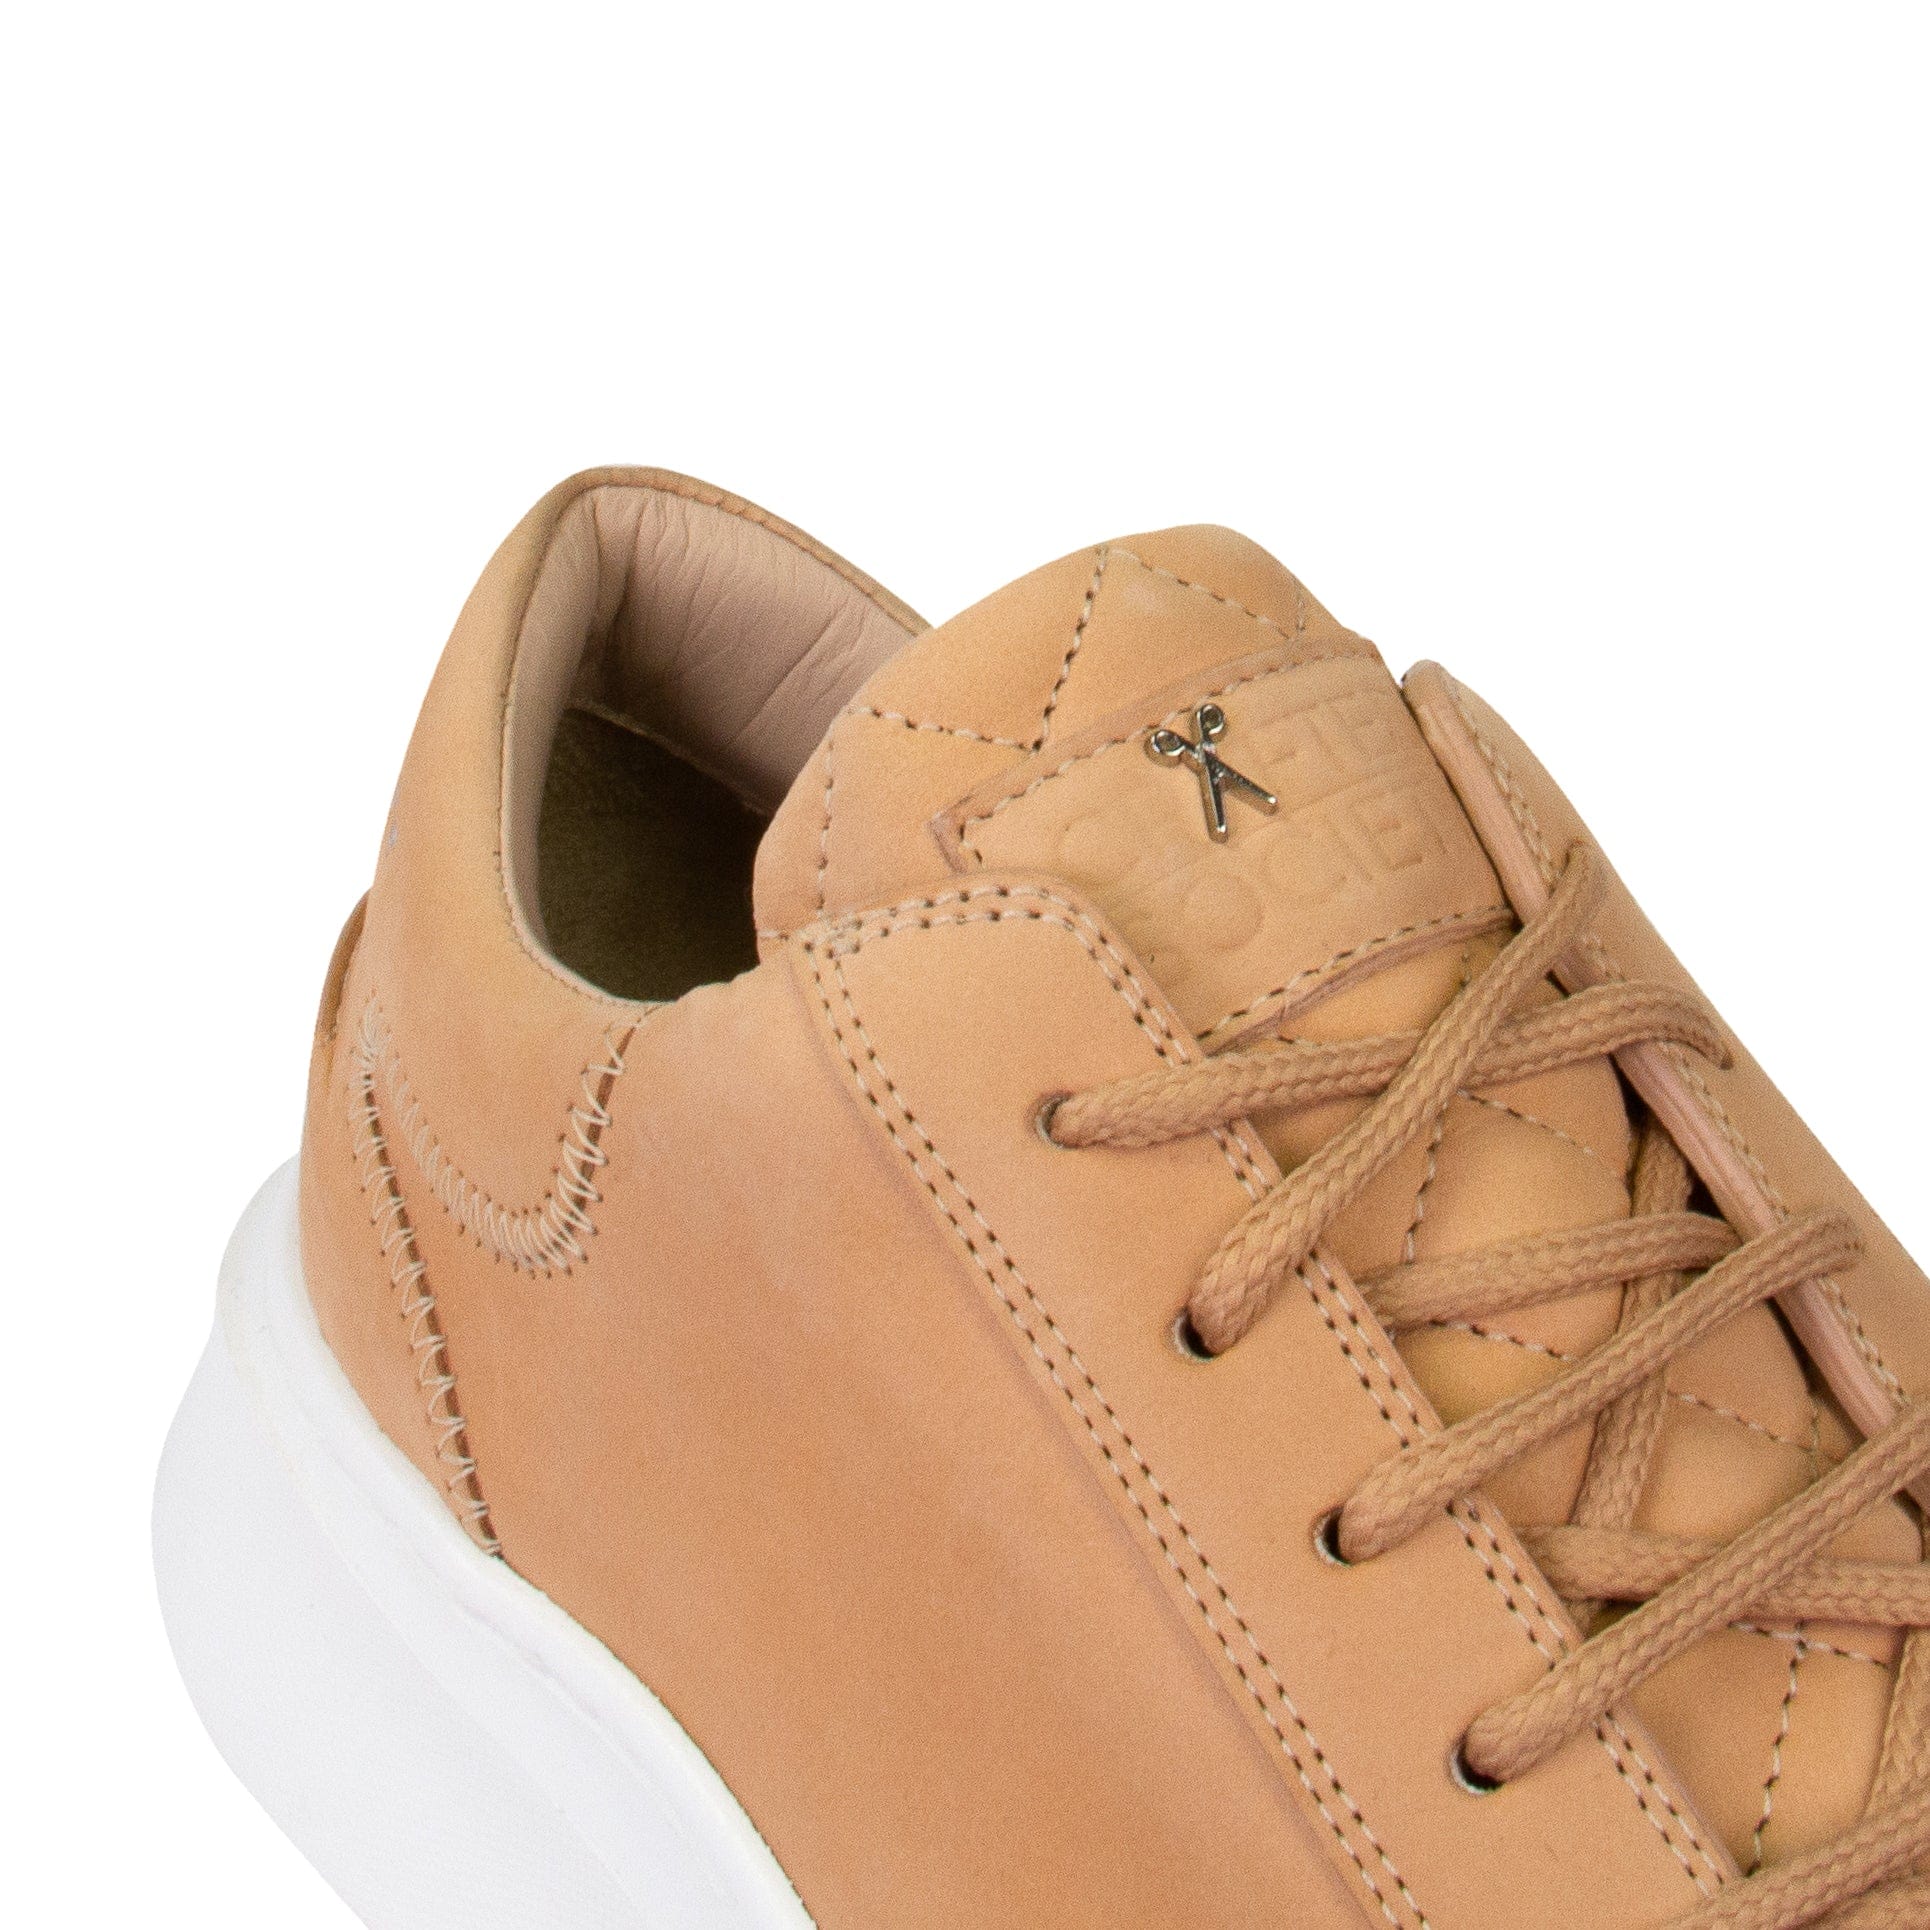 Matteo Low chunky Sneaker | All Tan Nubuck Leather | White Outsole | Made in Italy